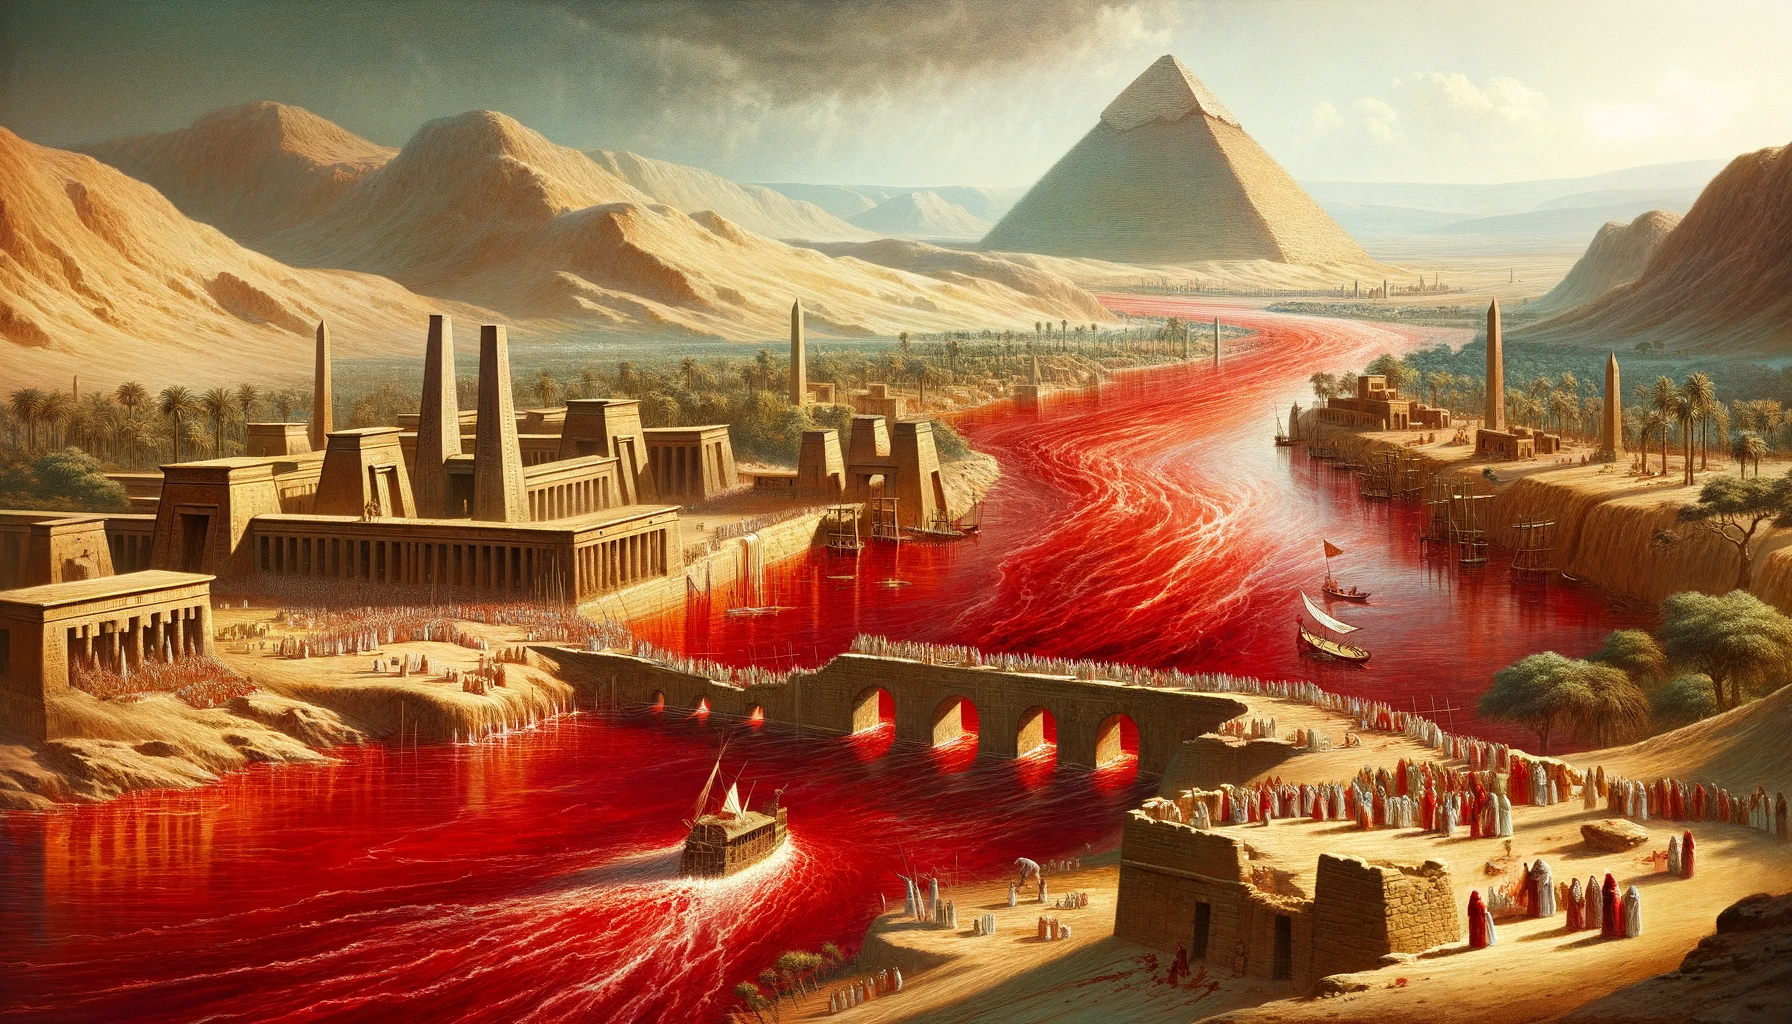 Ark.au Illustrated Bible - Exodus 7:20 - And Moses and Aaron did as the Lord had said; and when his rod had been lifted up and stretched out over the waters of the Nile before the eyes of Pharaoh and his servants, all the water in the Nile was turned to blood;